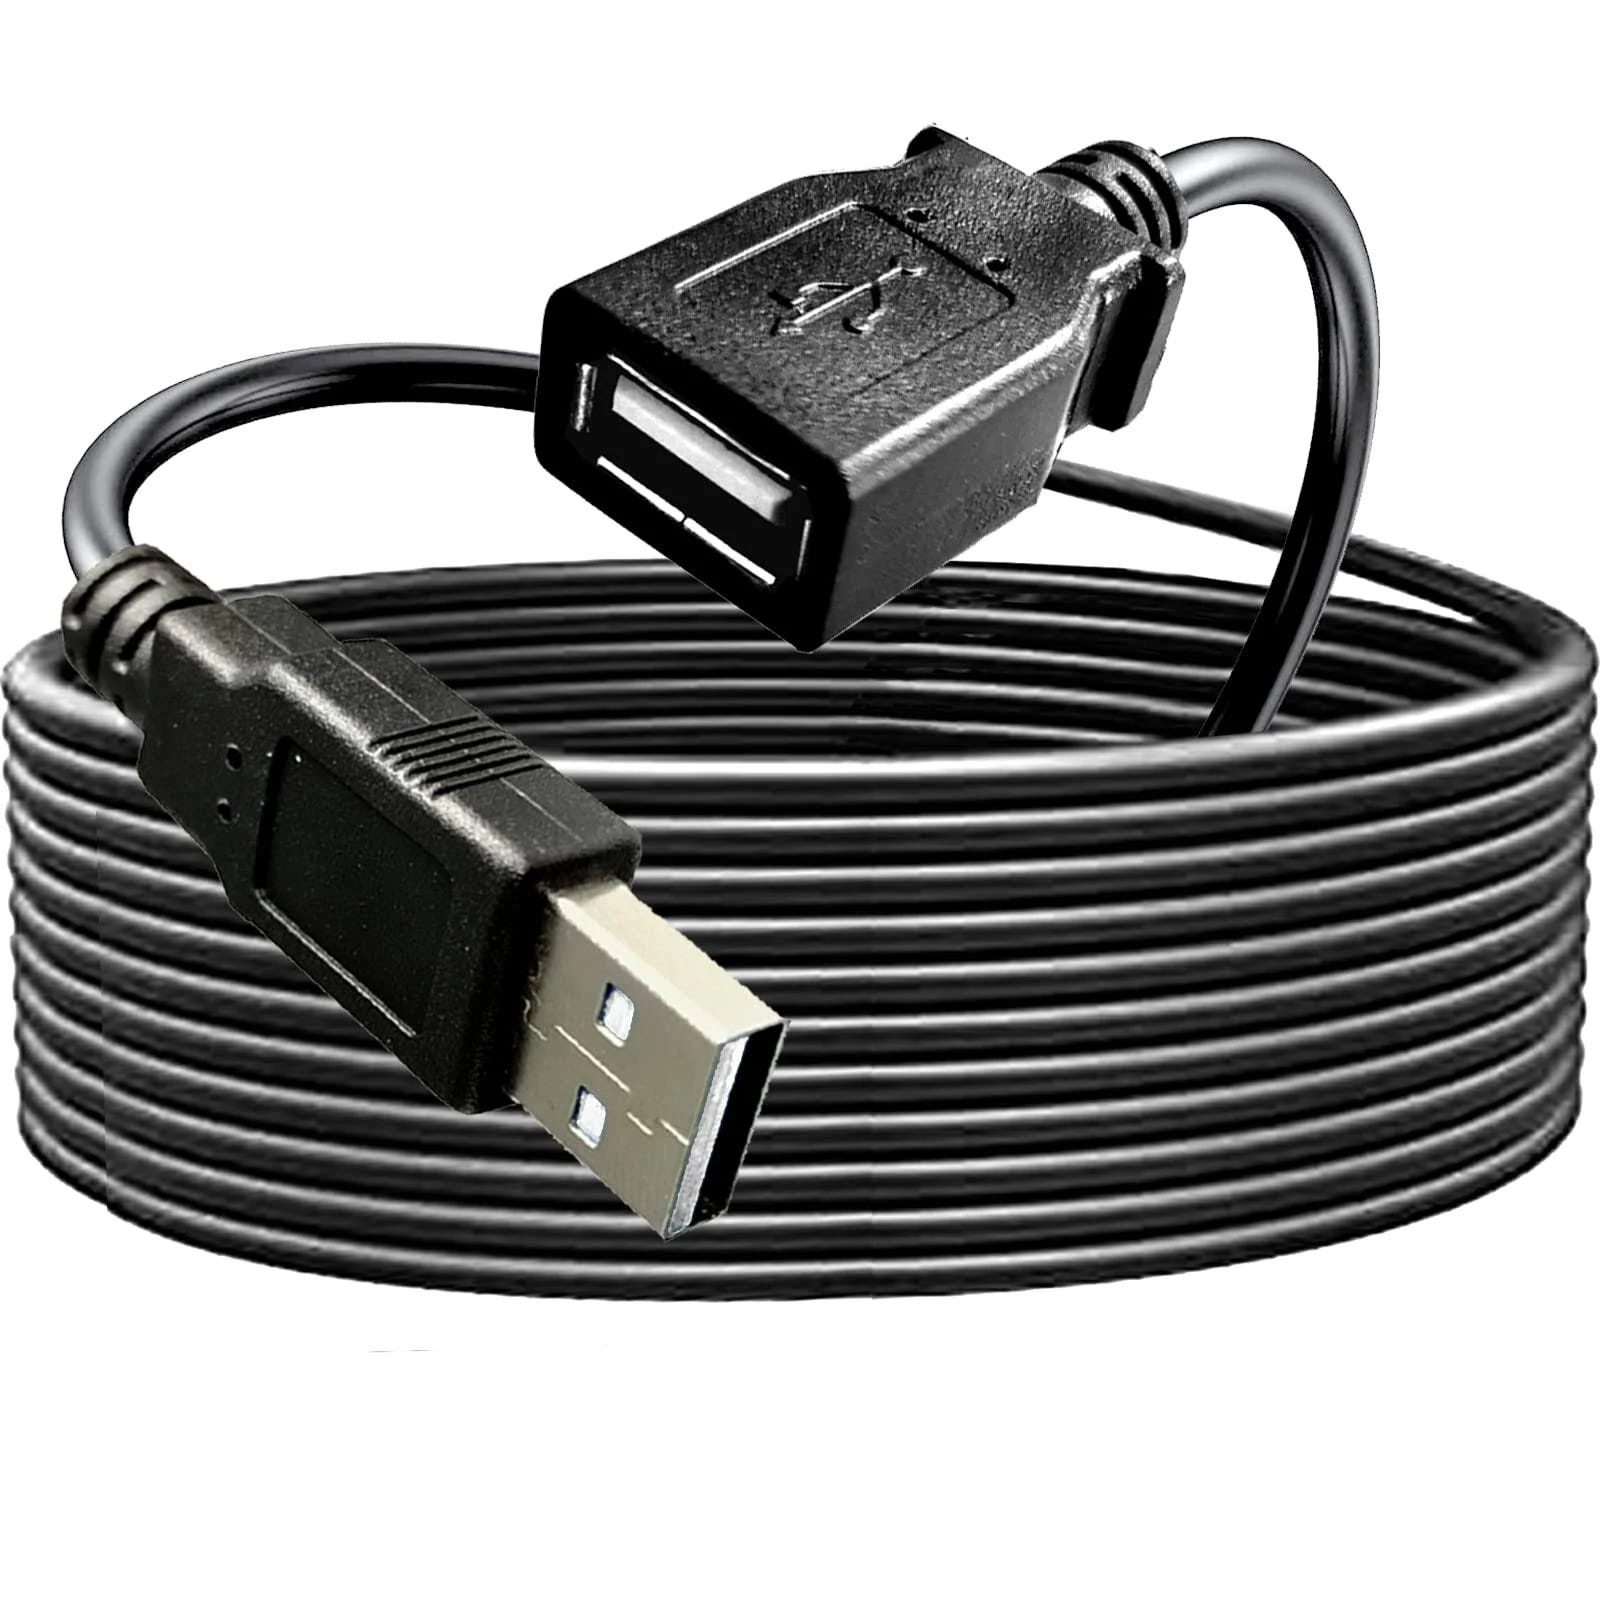 Fast Data Transfer USB Extension Cable - 30FT, Gold-Plated Connectors, Broad Compatibility | Image